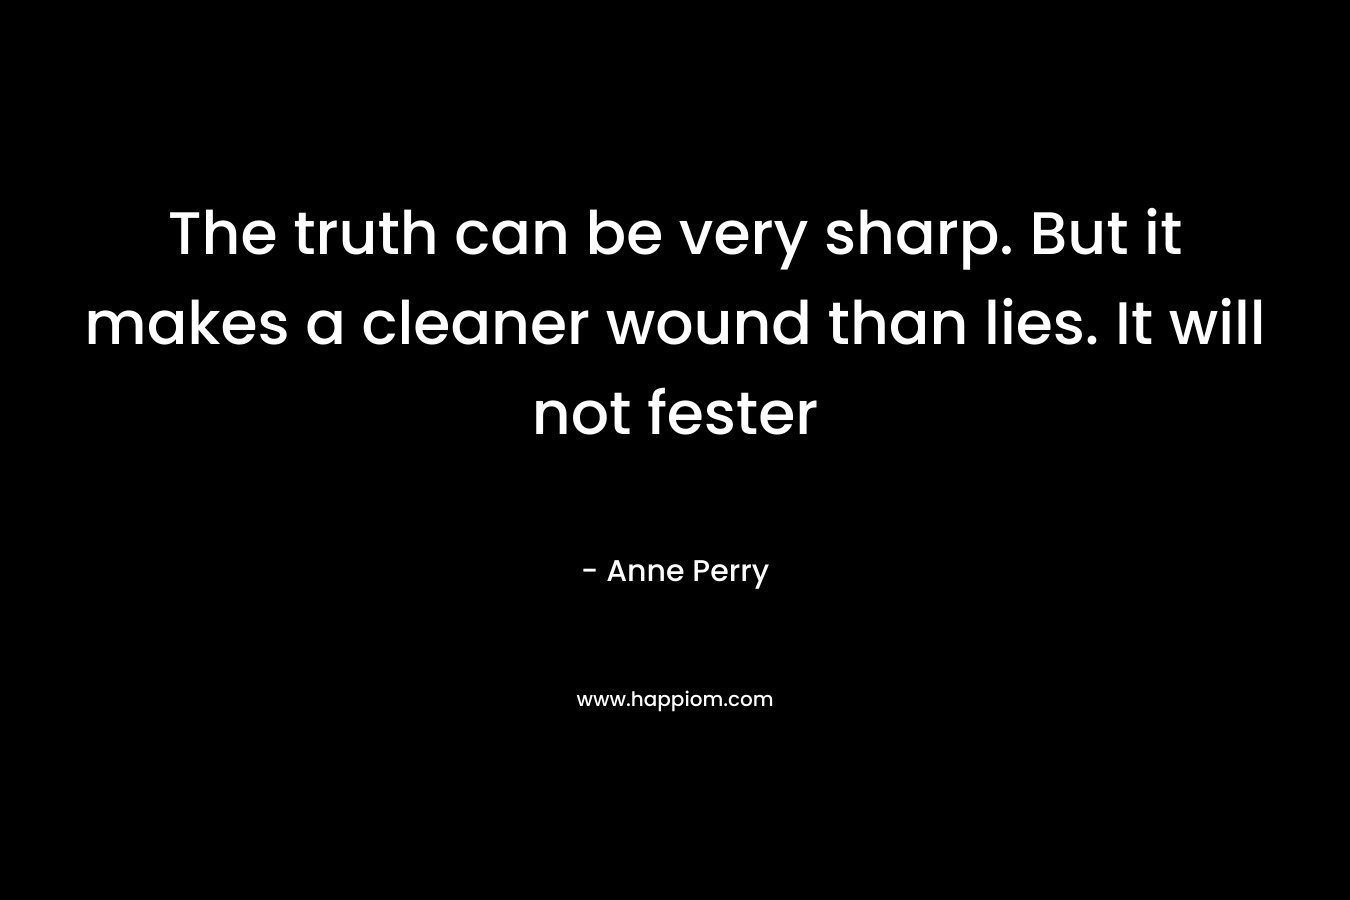 The truth can be very sharp. But it makes a cleaner wound than lies. It will not fester – Anne Perry